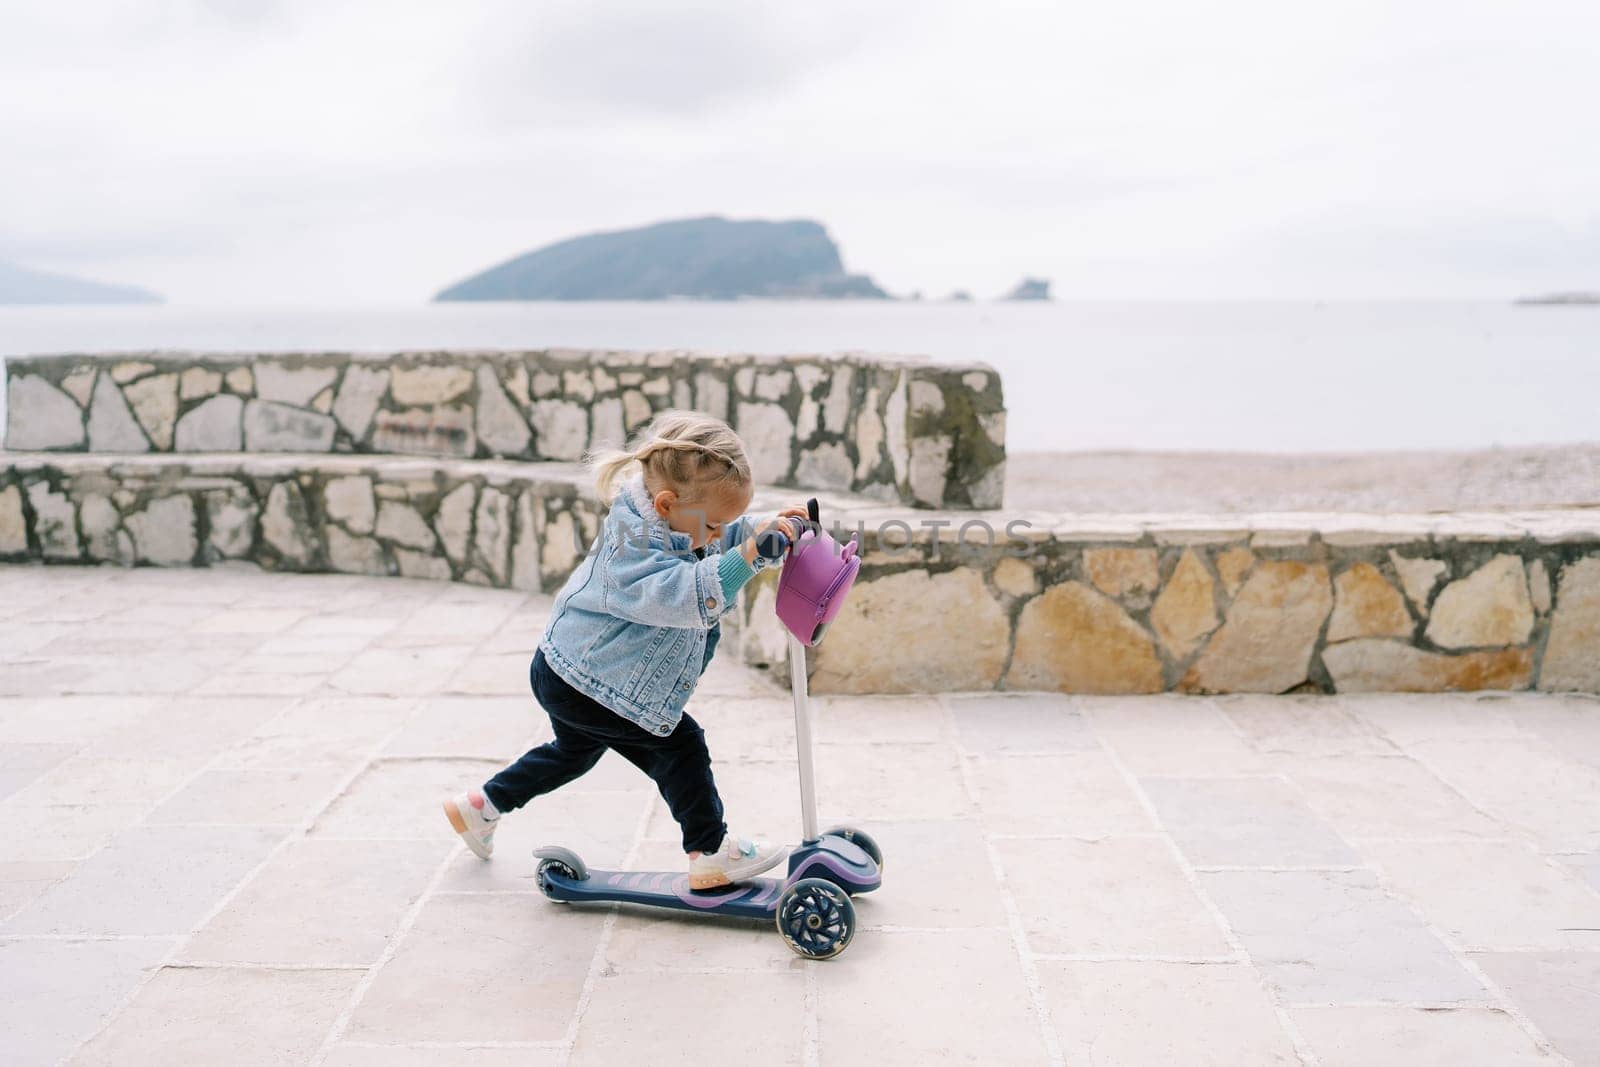 Little girl rides a scooter on a paved area near the sea looking down at her feet. High quality photo